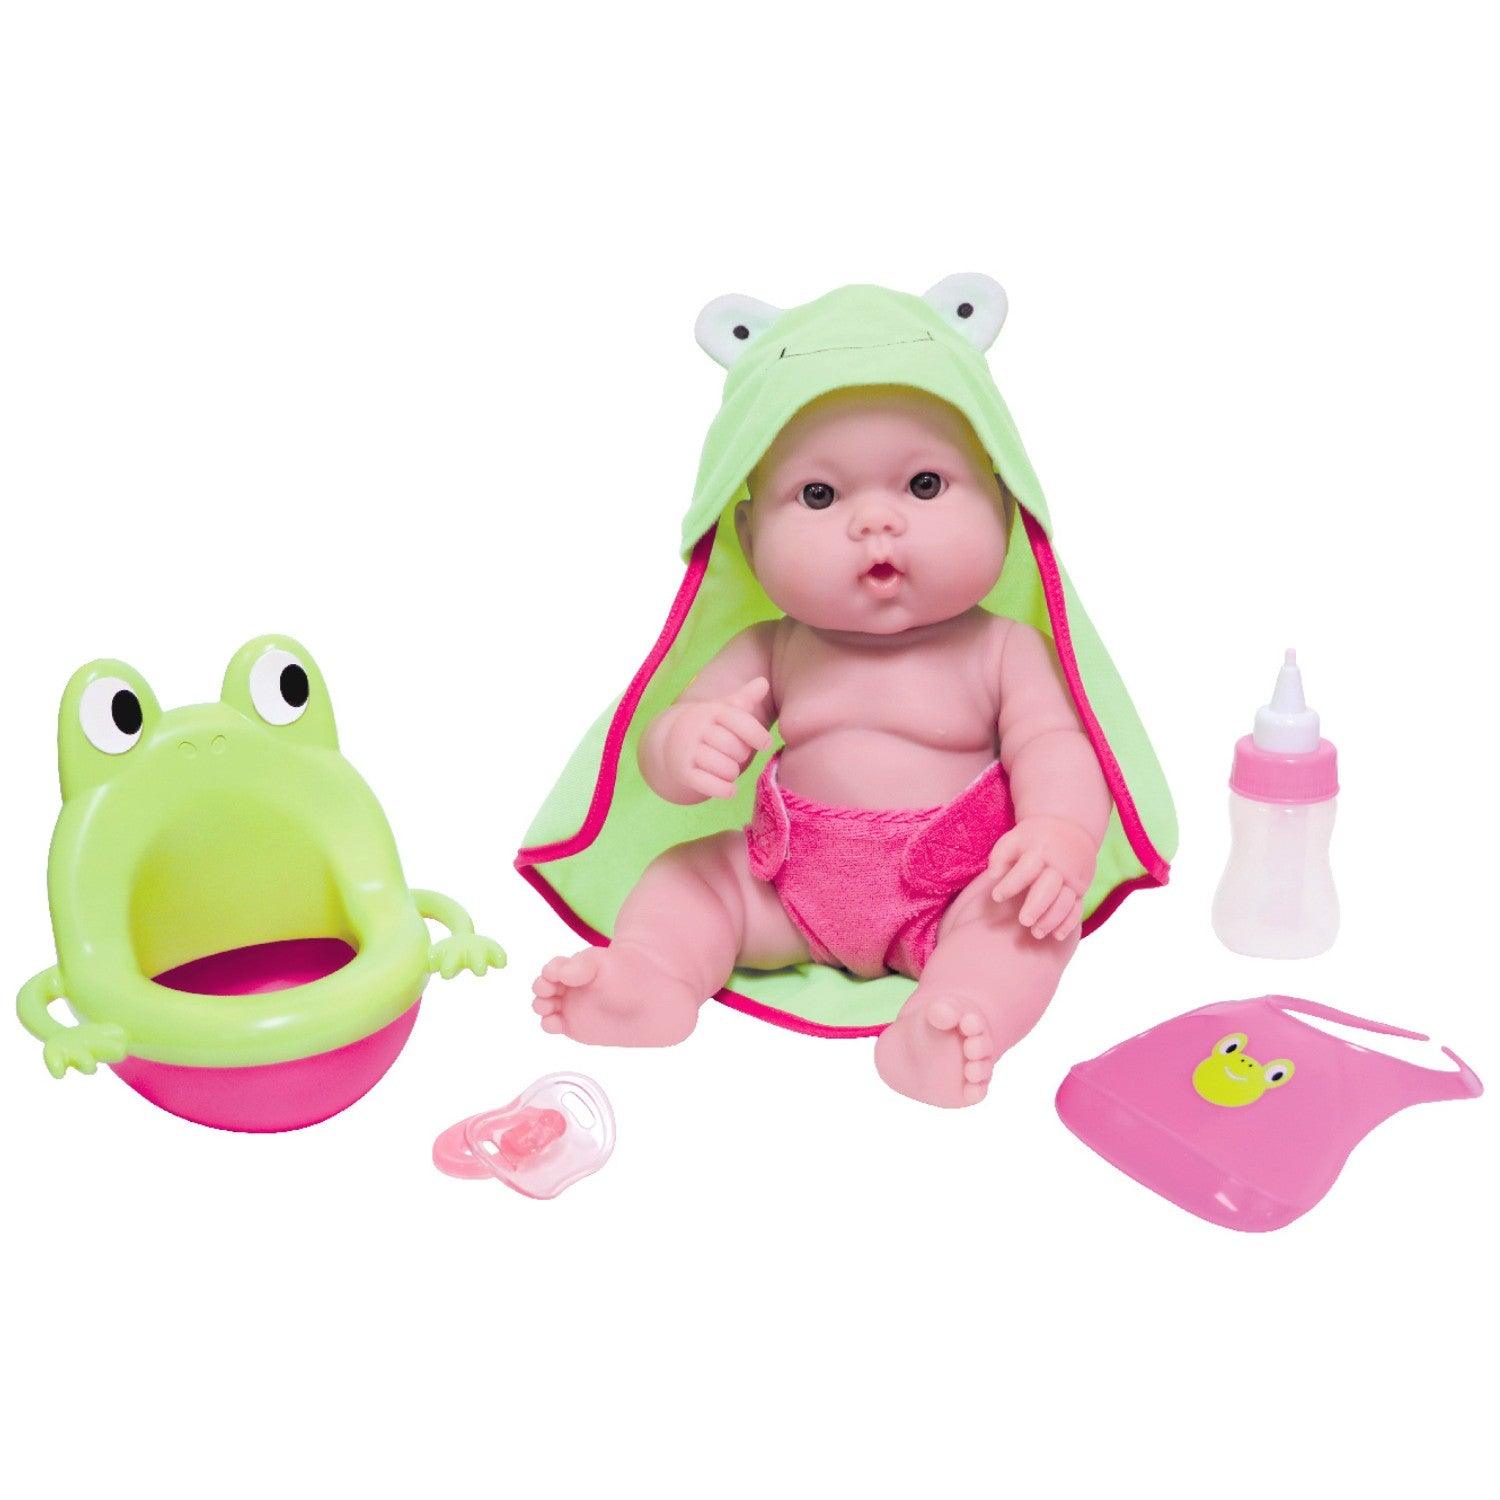 JC Toys, Lots to Love Babies 14" All-Vinyl Doll Frog Potty Gift Set with Accessories - JC Toys Group Inc.